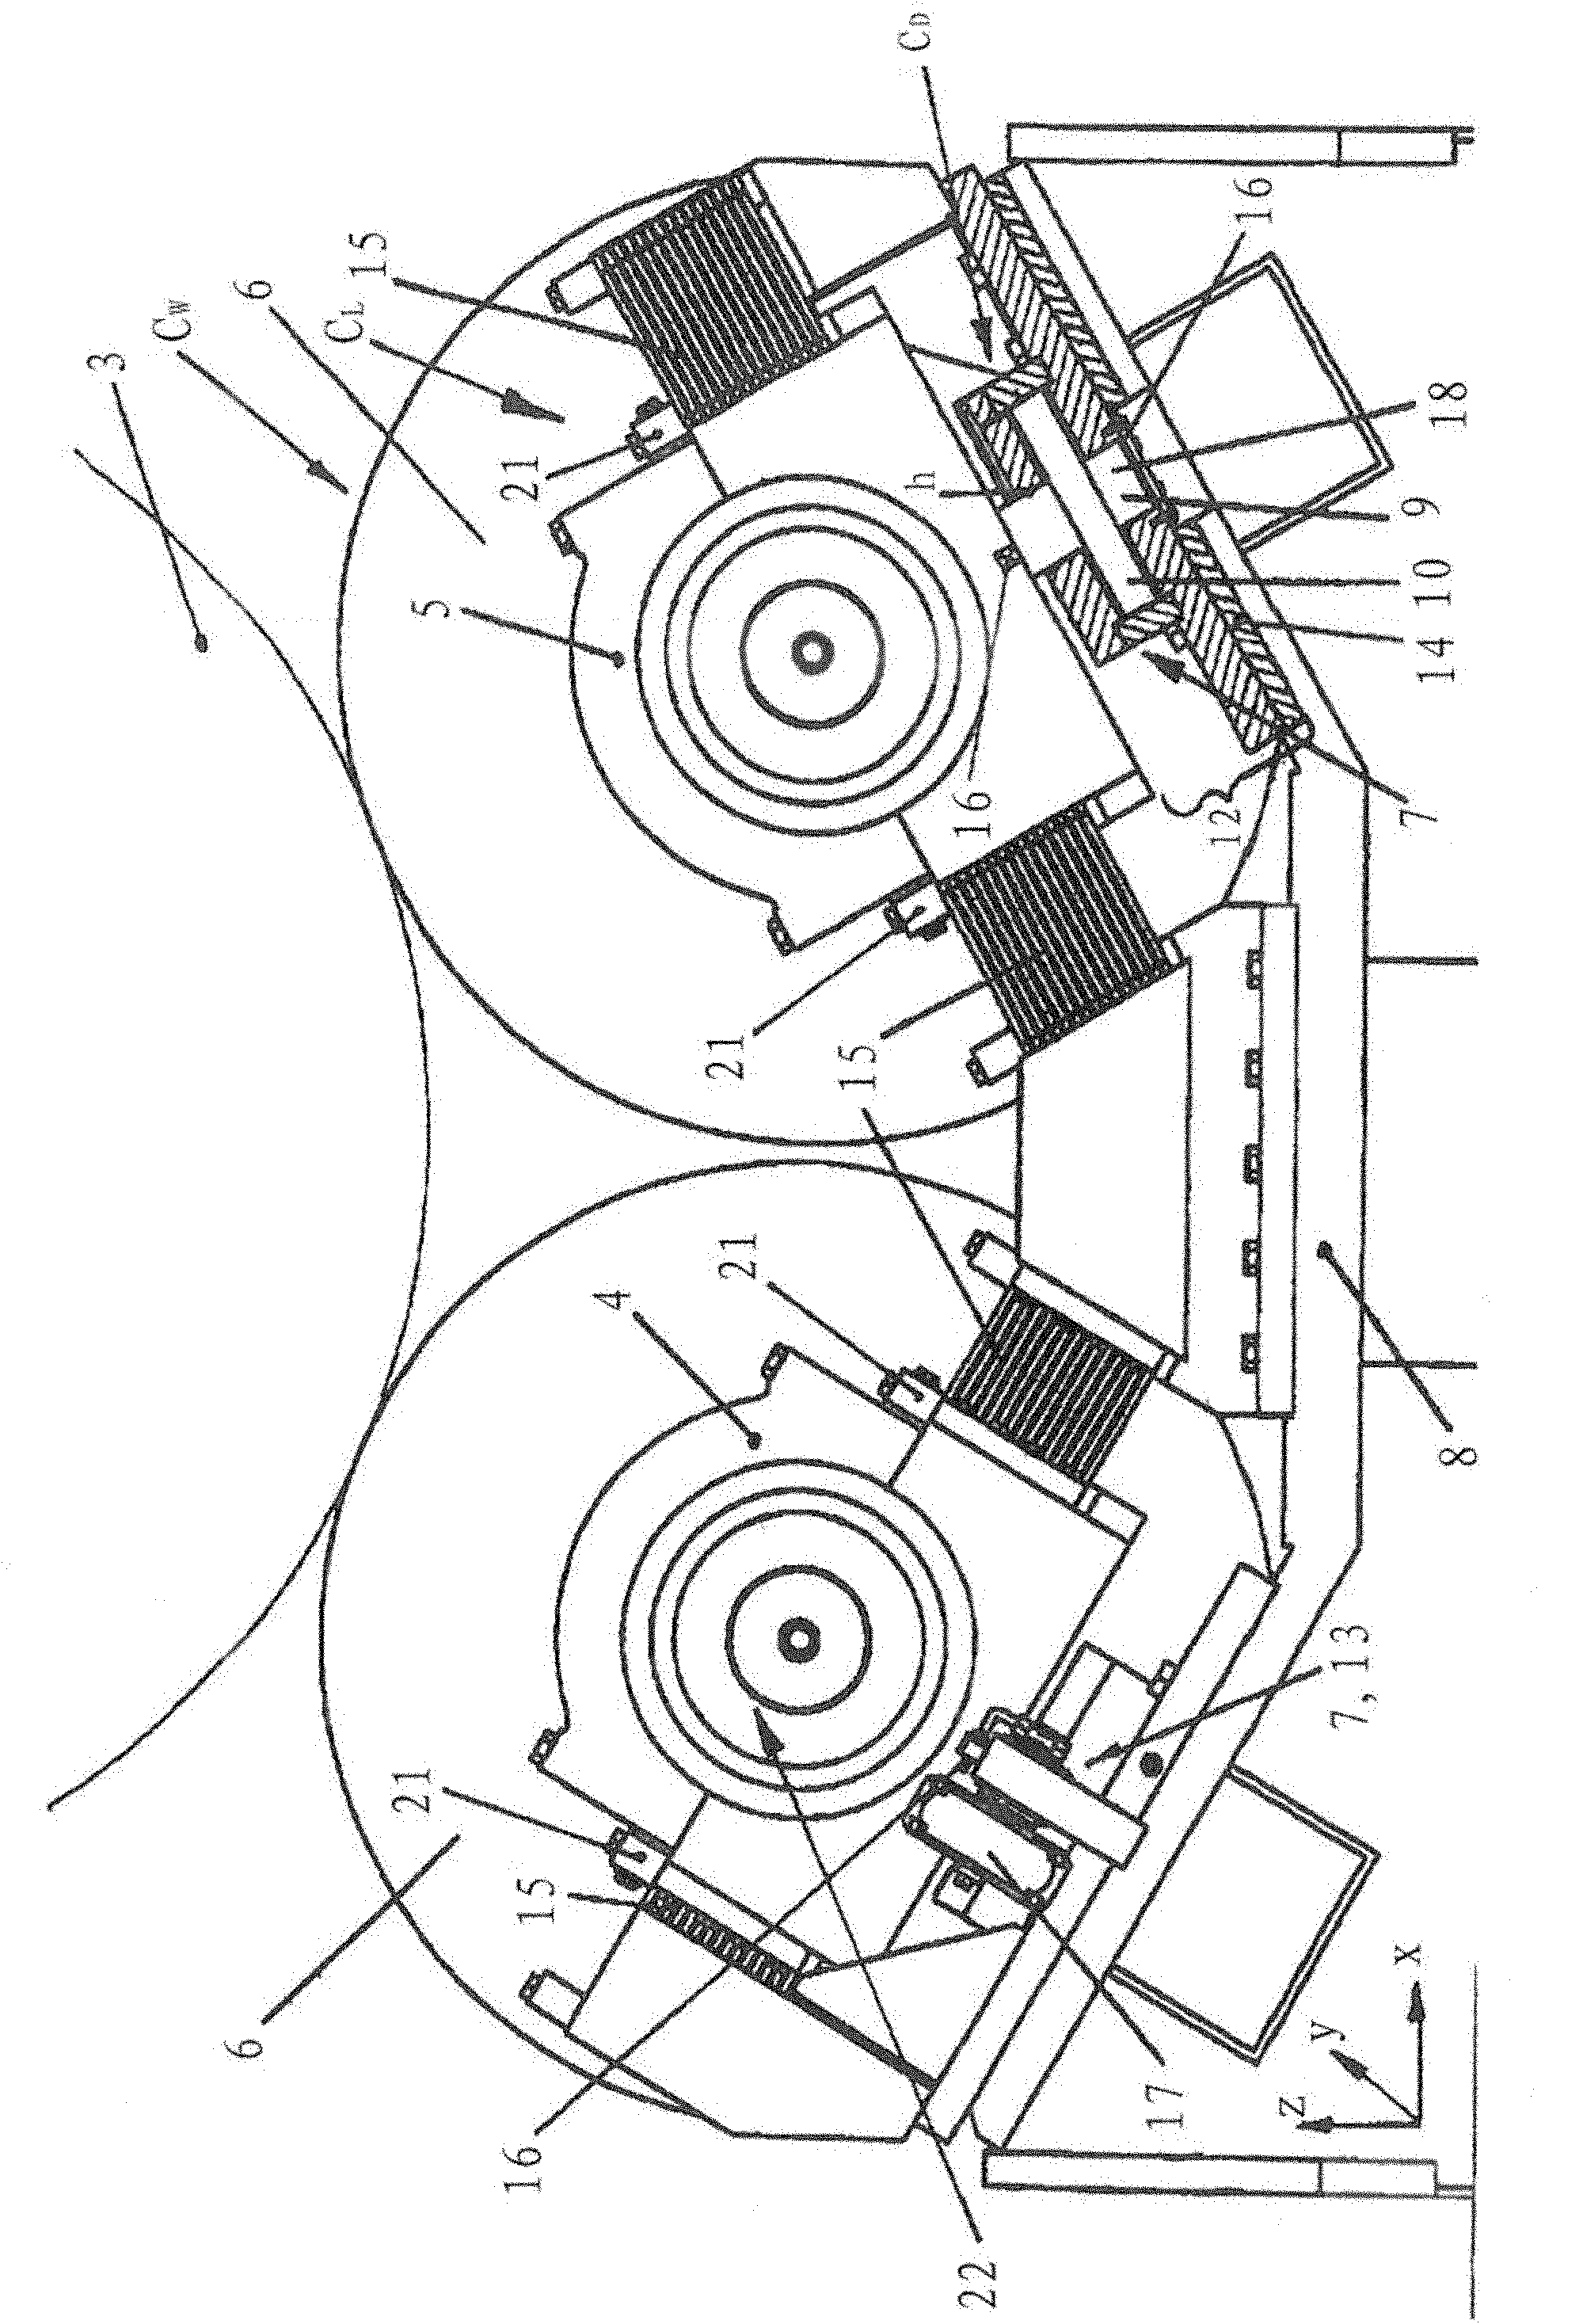 Material roll winding device